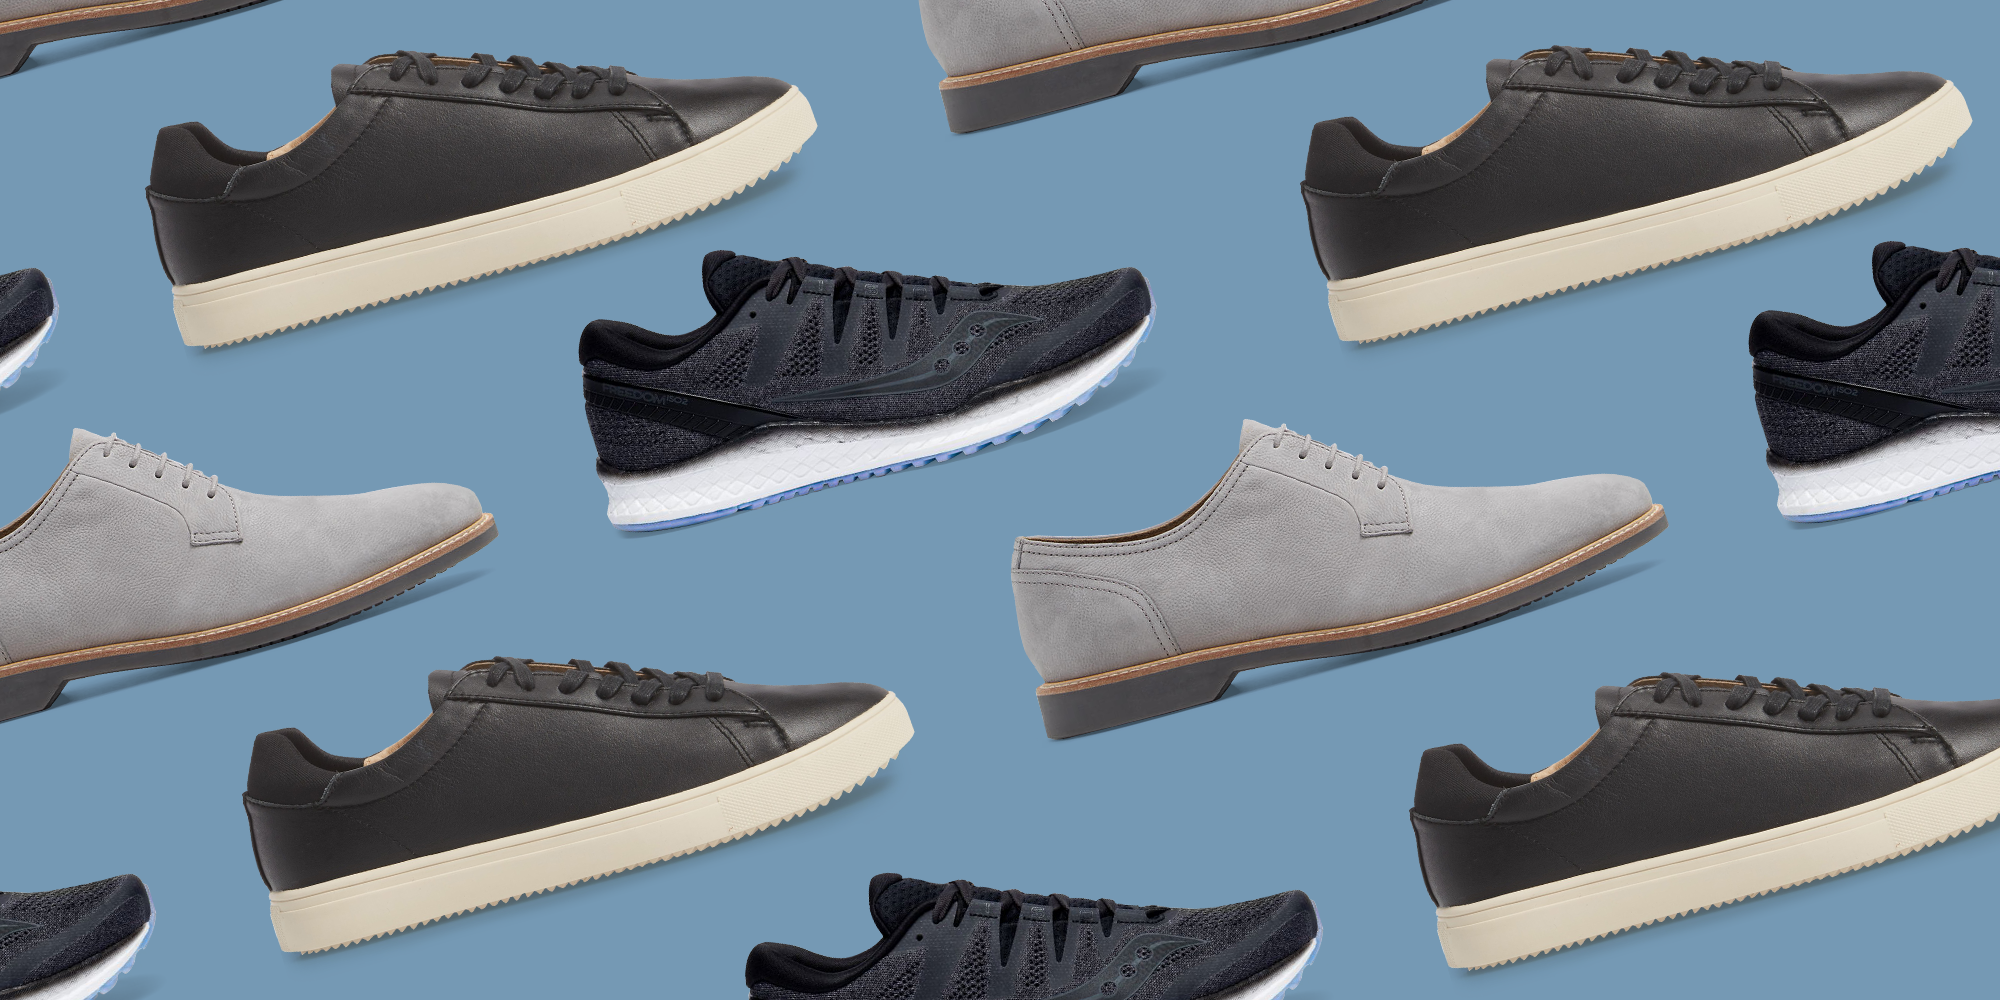 Top 5 Everyone Must-Own Shoe Styles!